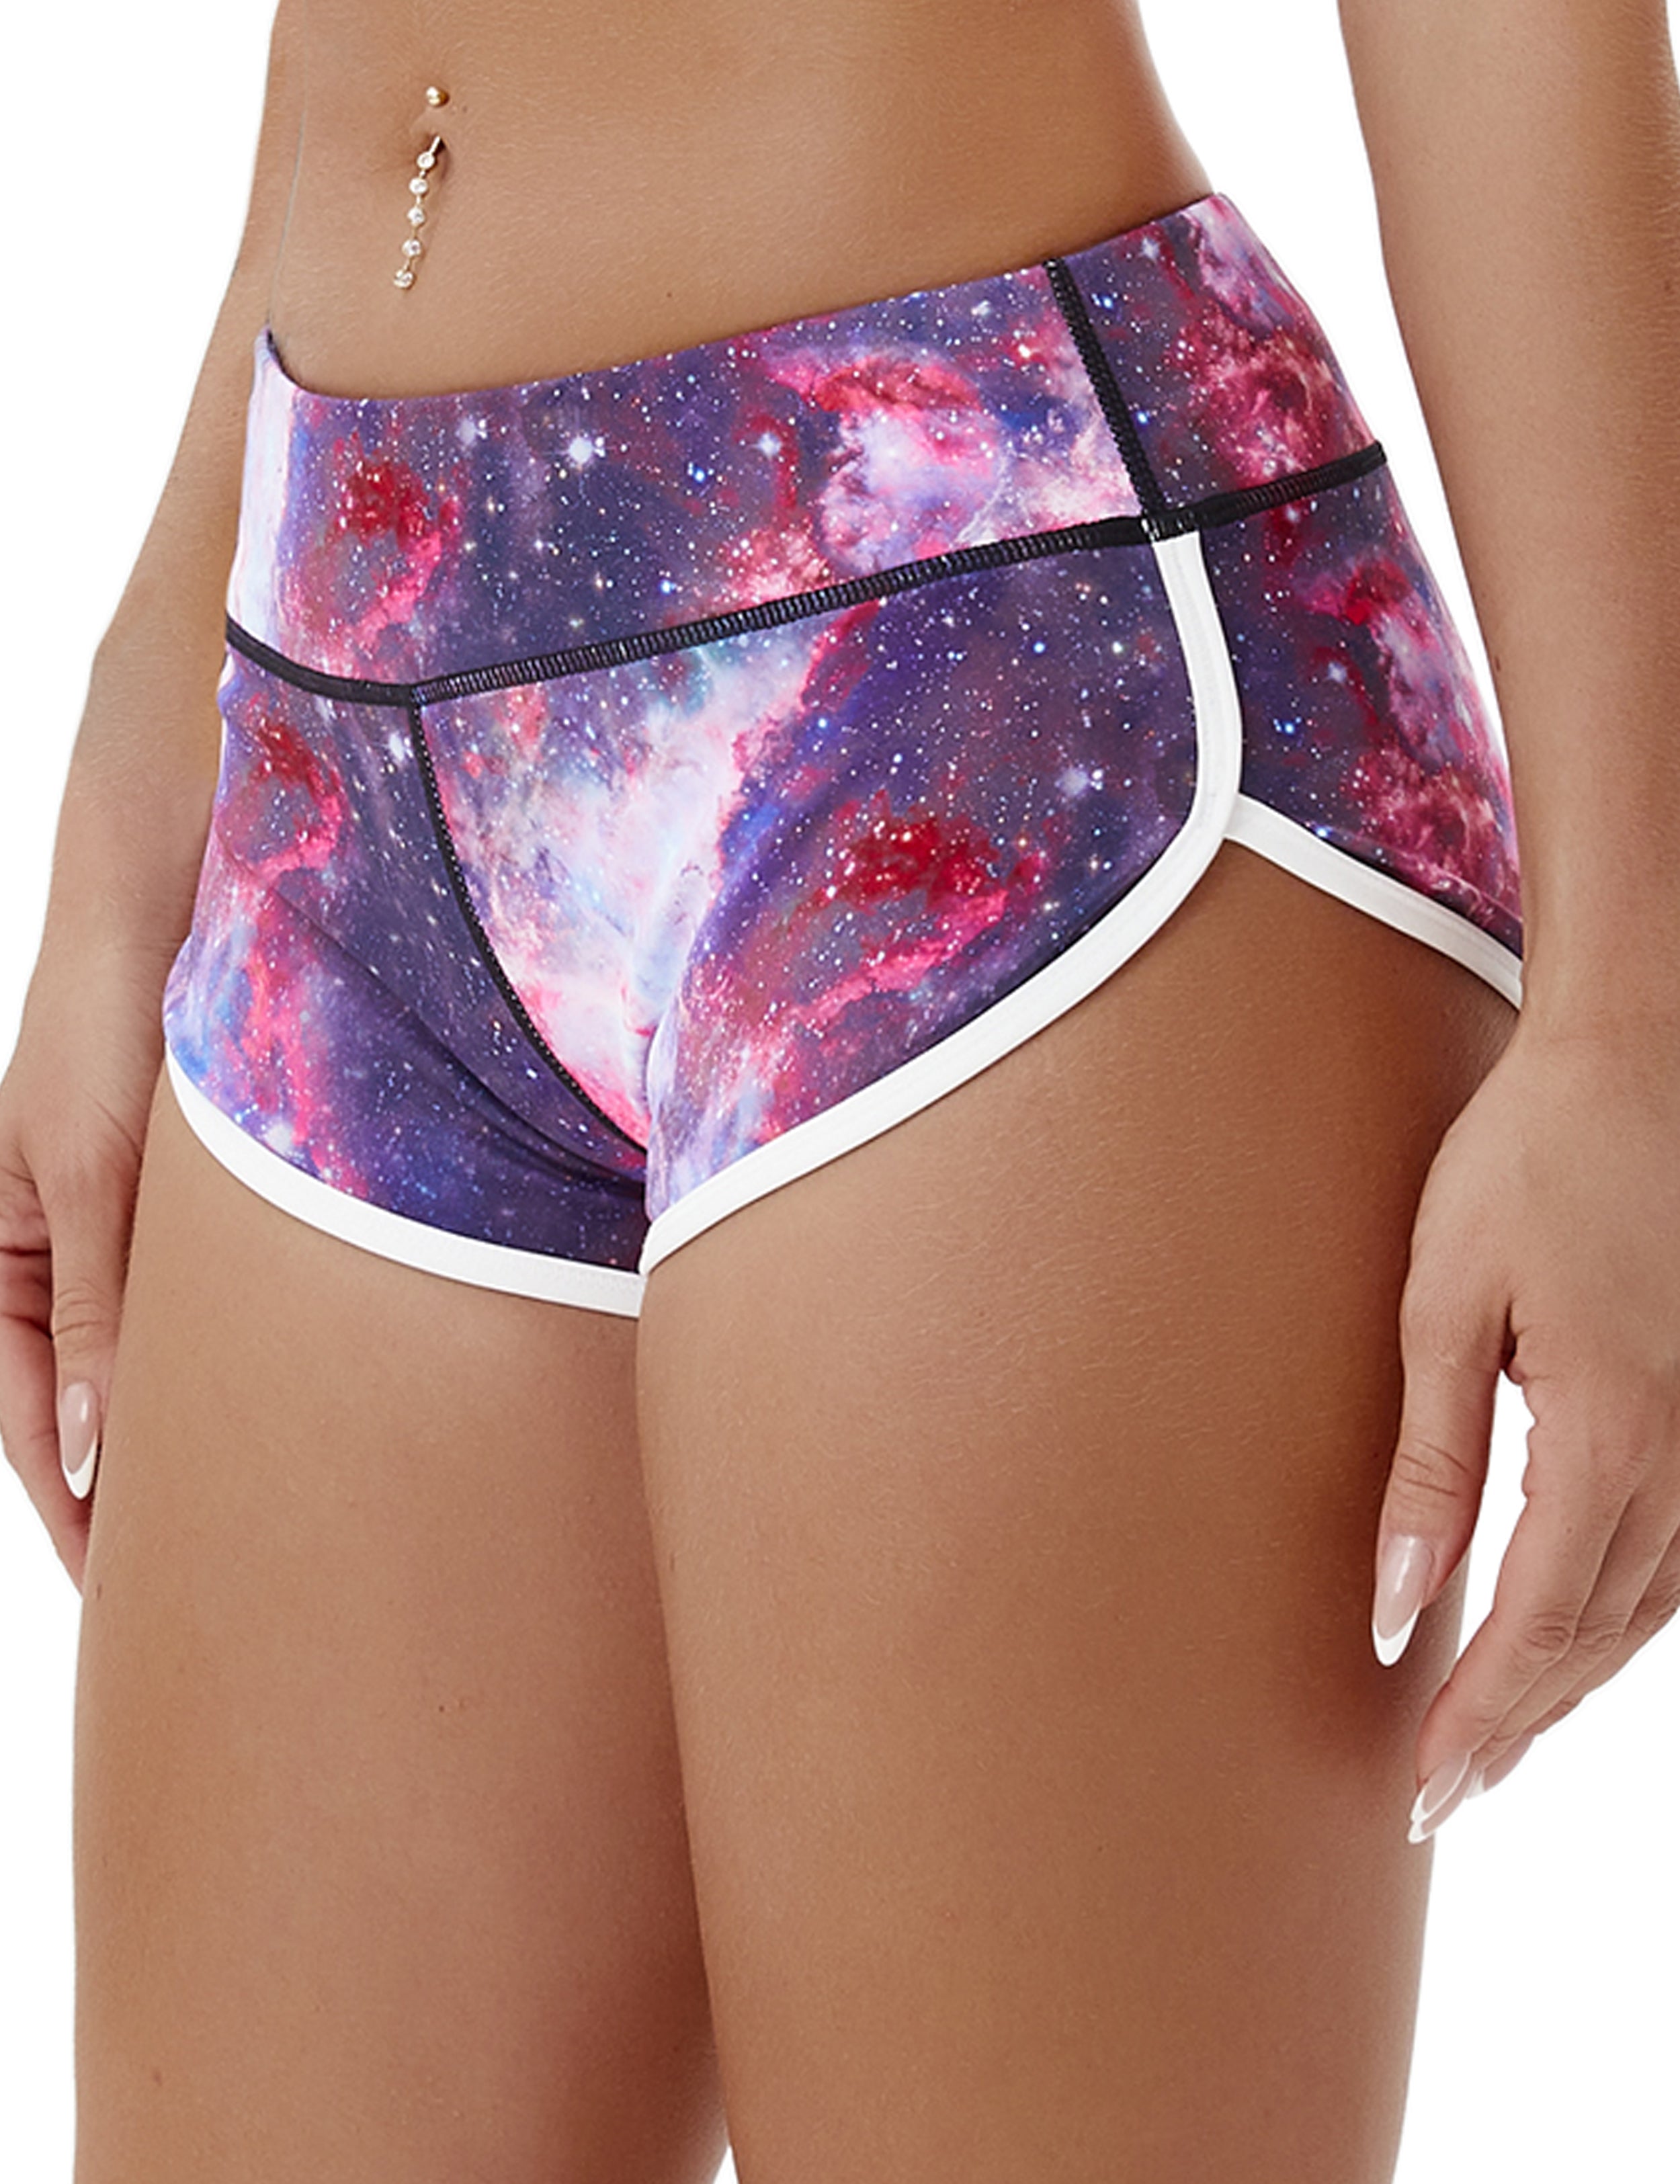 Printed Booty Pilates Shorts galaxy Sleek, soft, smooth and totally comfortable: our newest sexy style is here. Softest-ever fabric High elasticity High density 4-way stretch Fabric doesn't attract lint easily No see-through Moisture-wicking Machine wash 78% Polyester, 22% Spandex